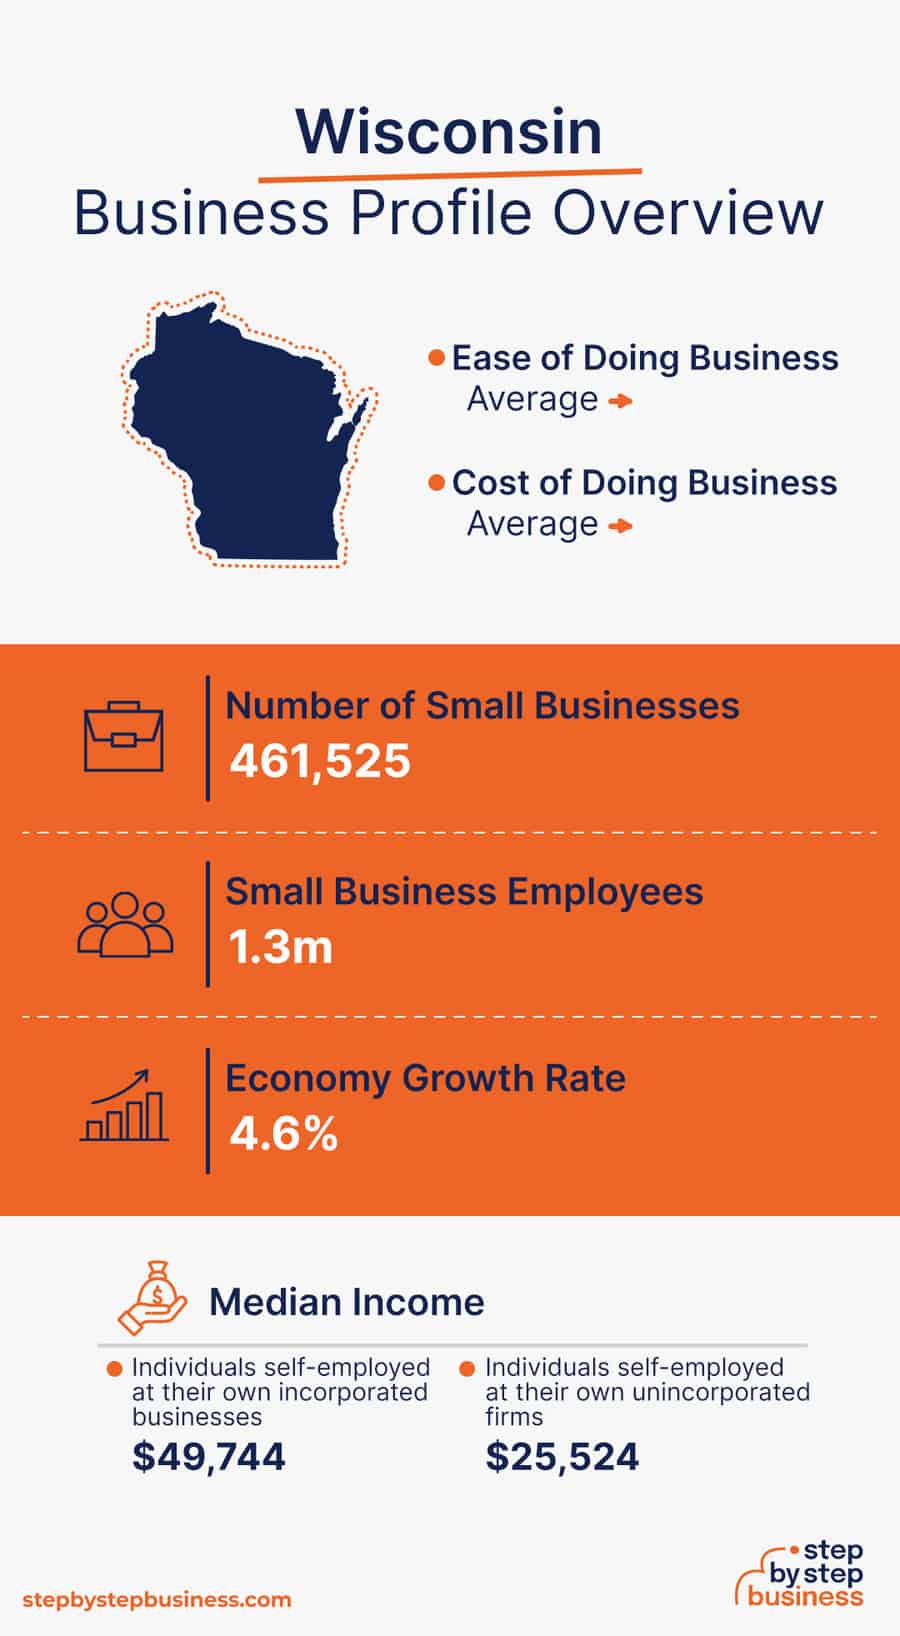 Wisconsin Business Profile Overview